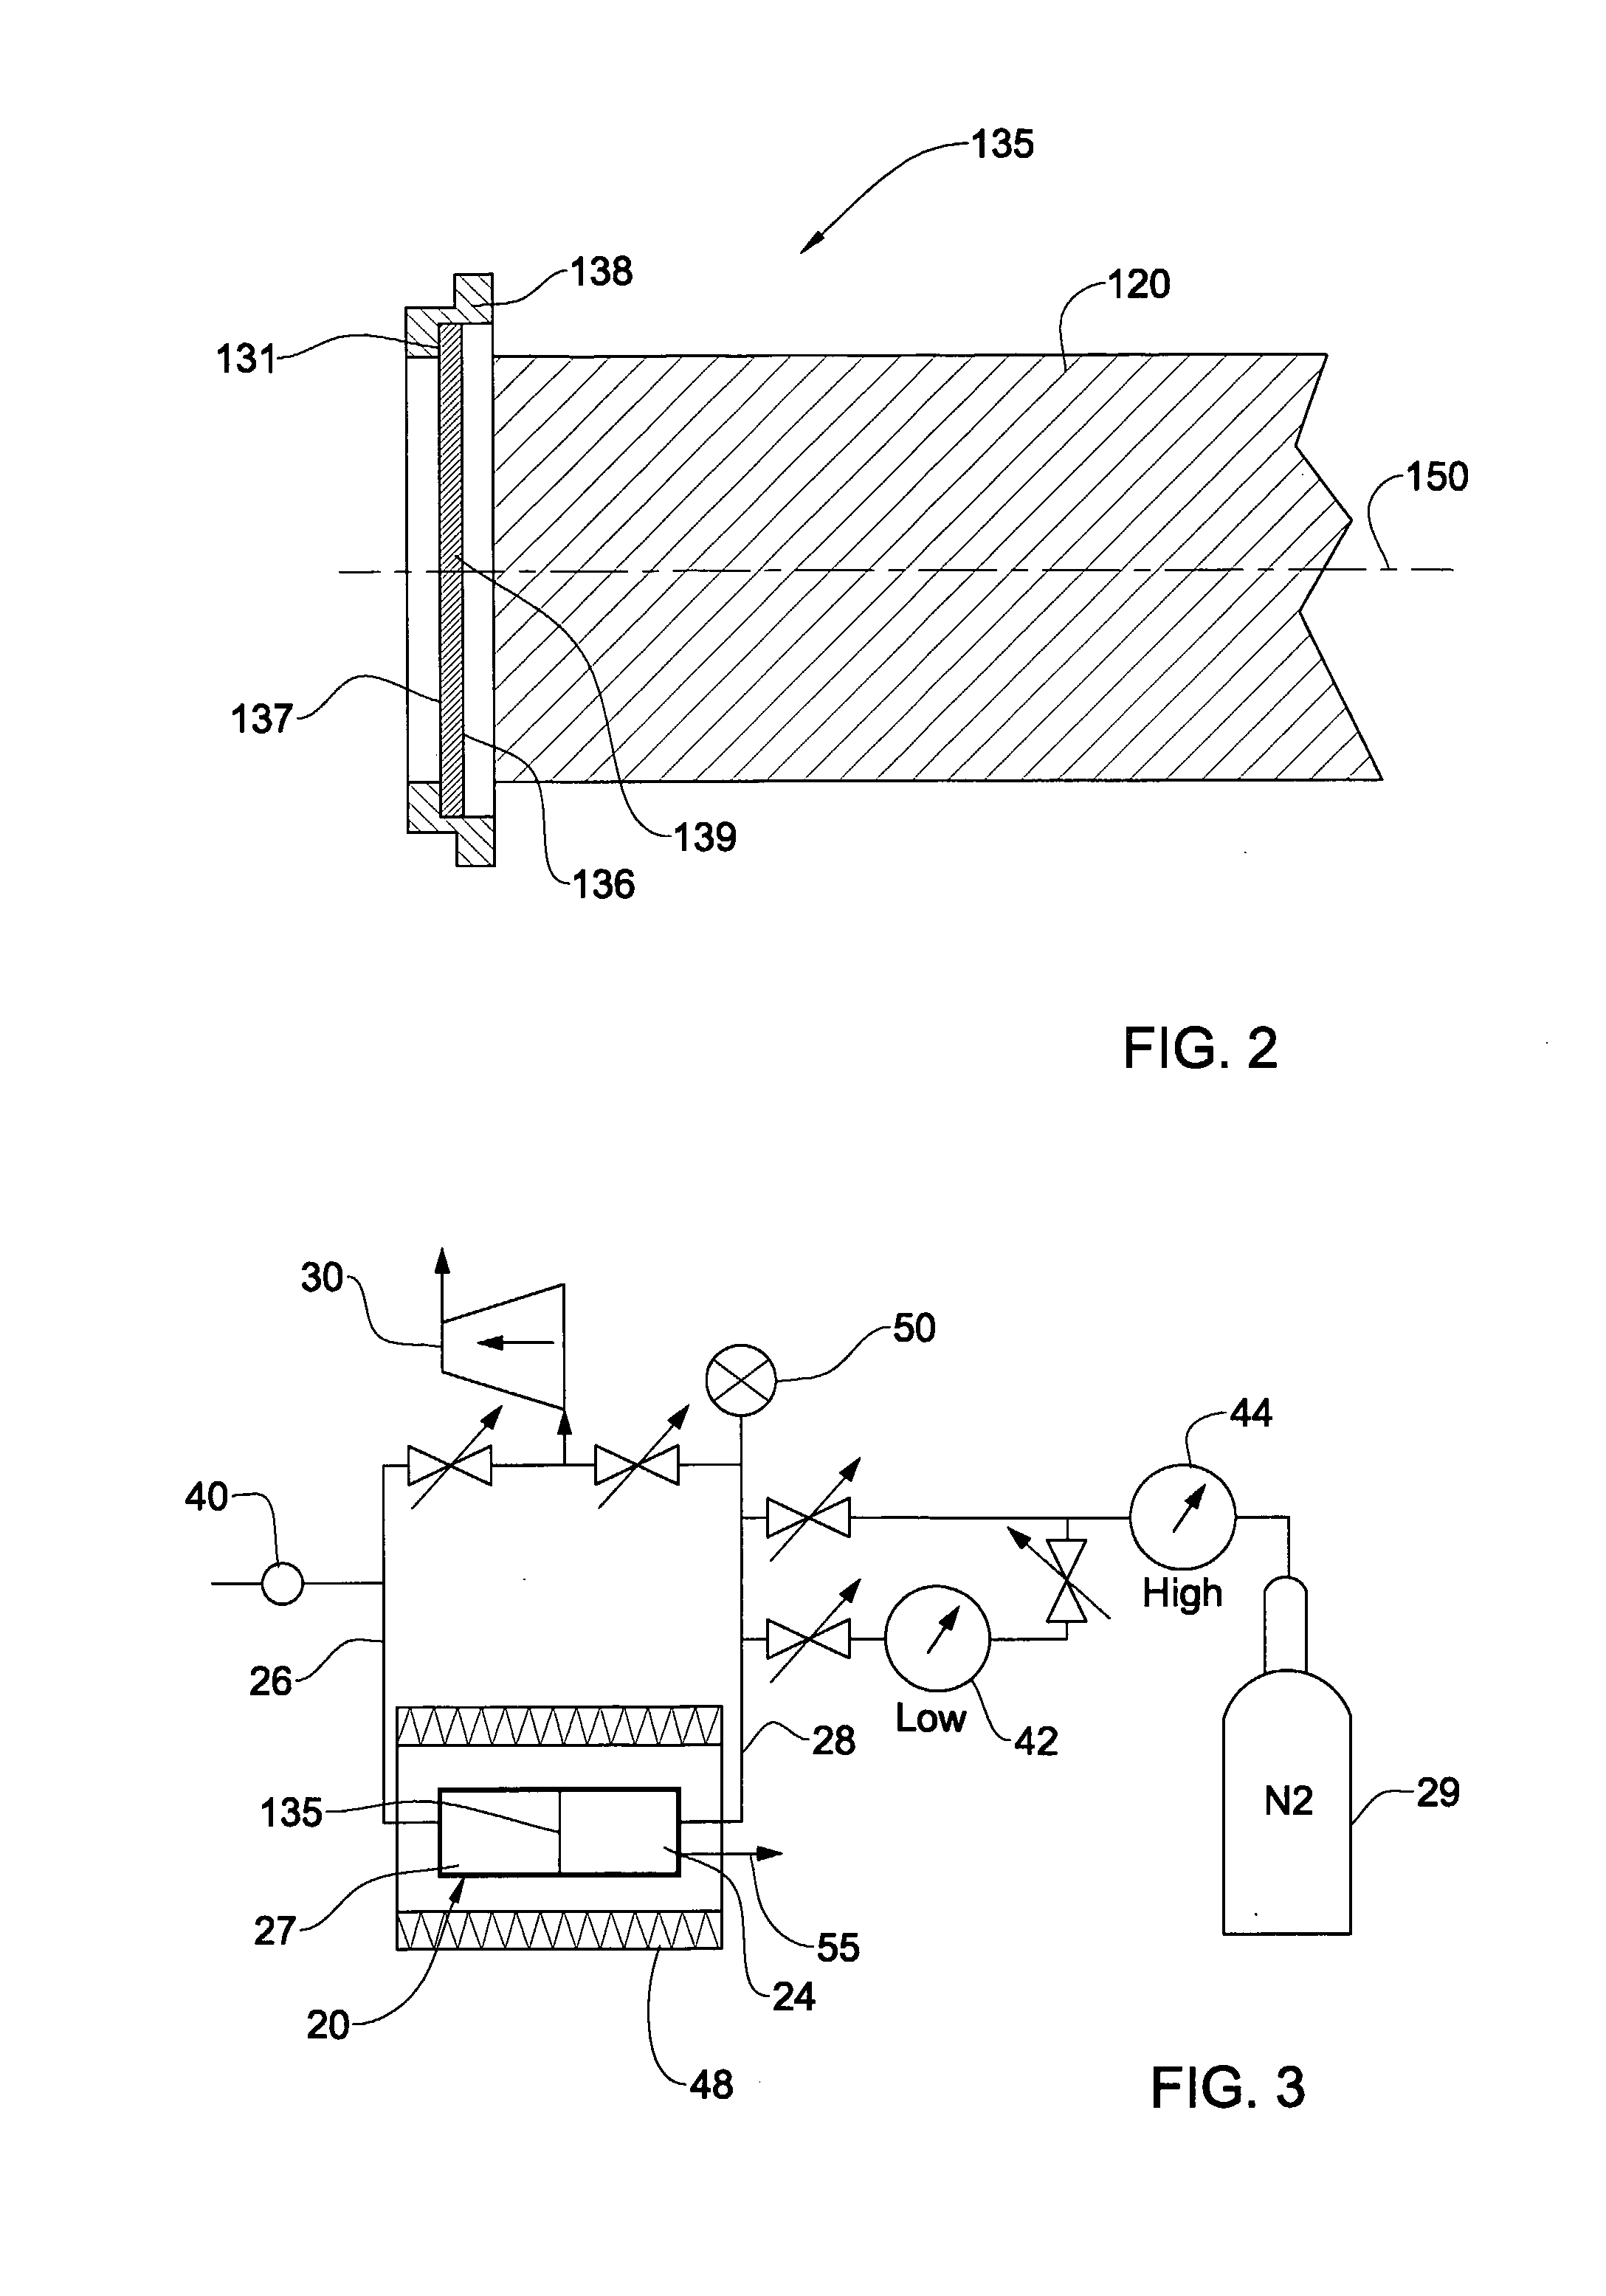 Method And System For Production Of Radioisotopes, And Radioisotopes Produced Thereby